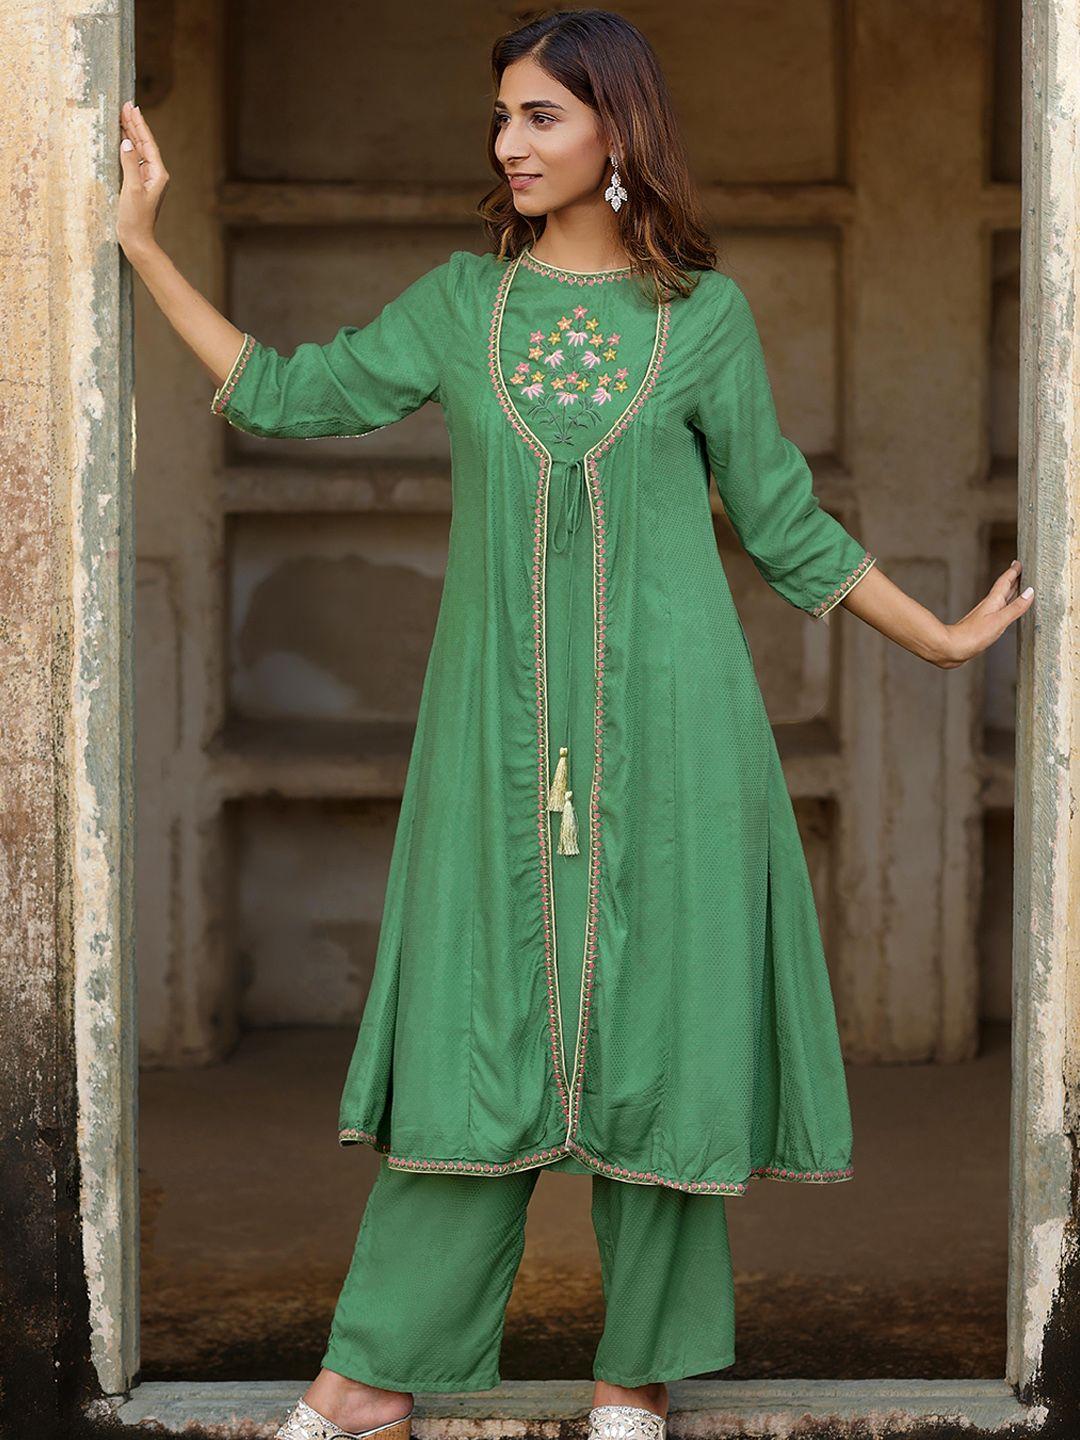 kasya floral embroidered round neck a-line kurta with palazzos